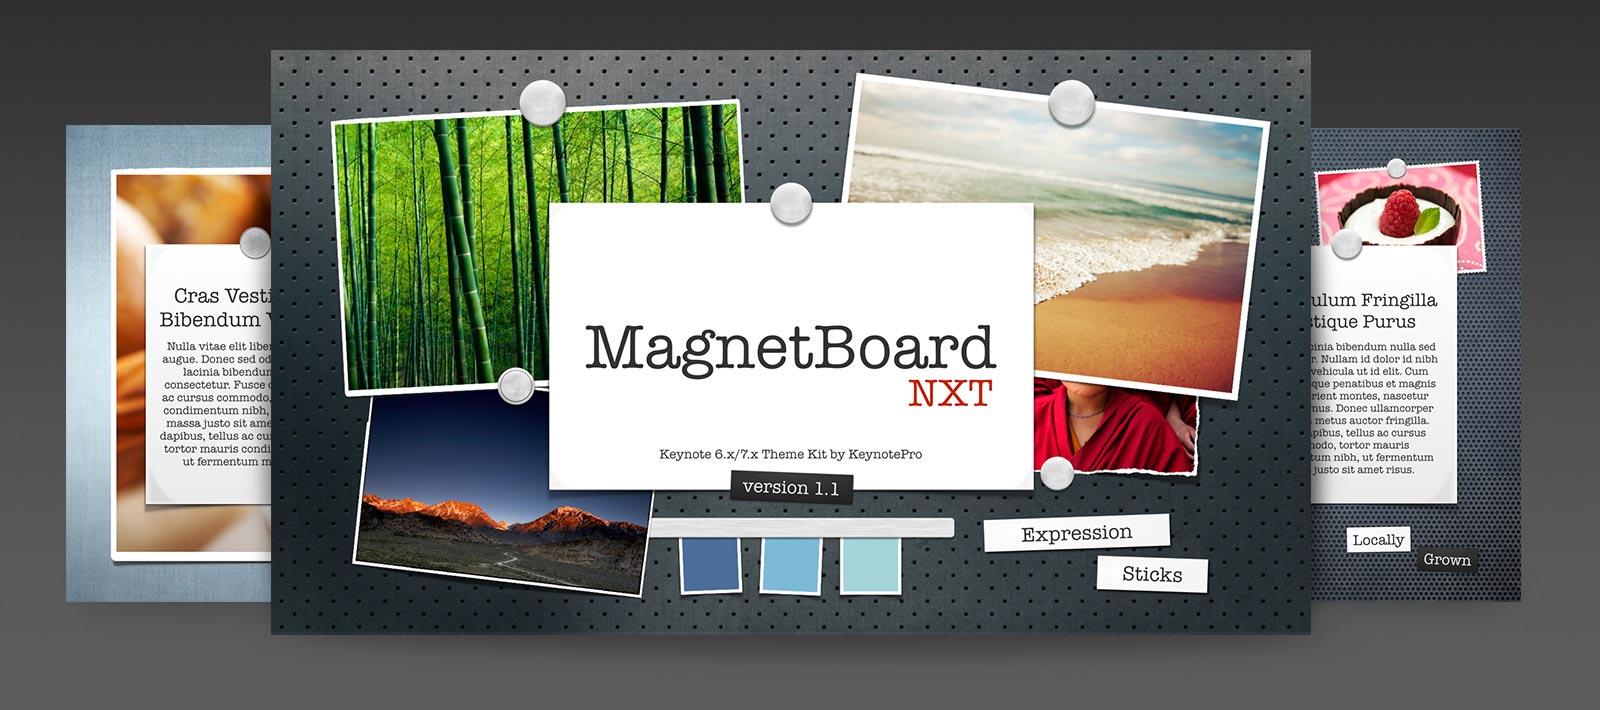 MagnetBoard NXT Version 1.1 Preview